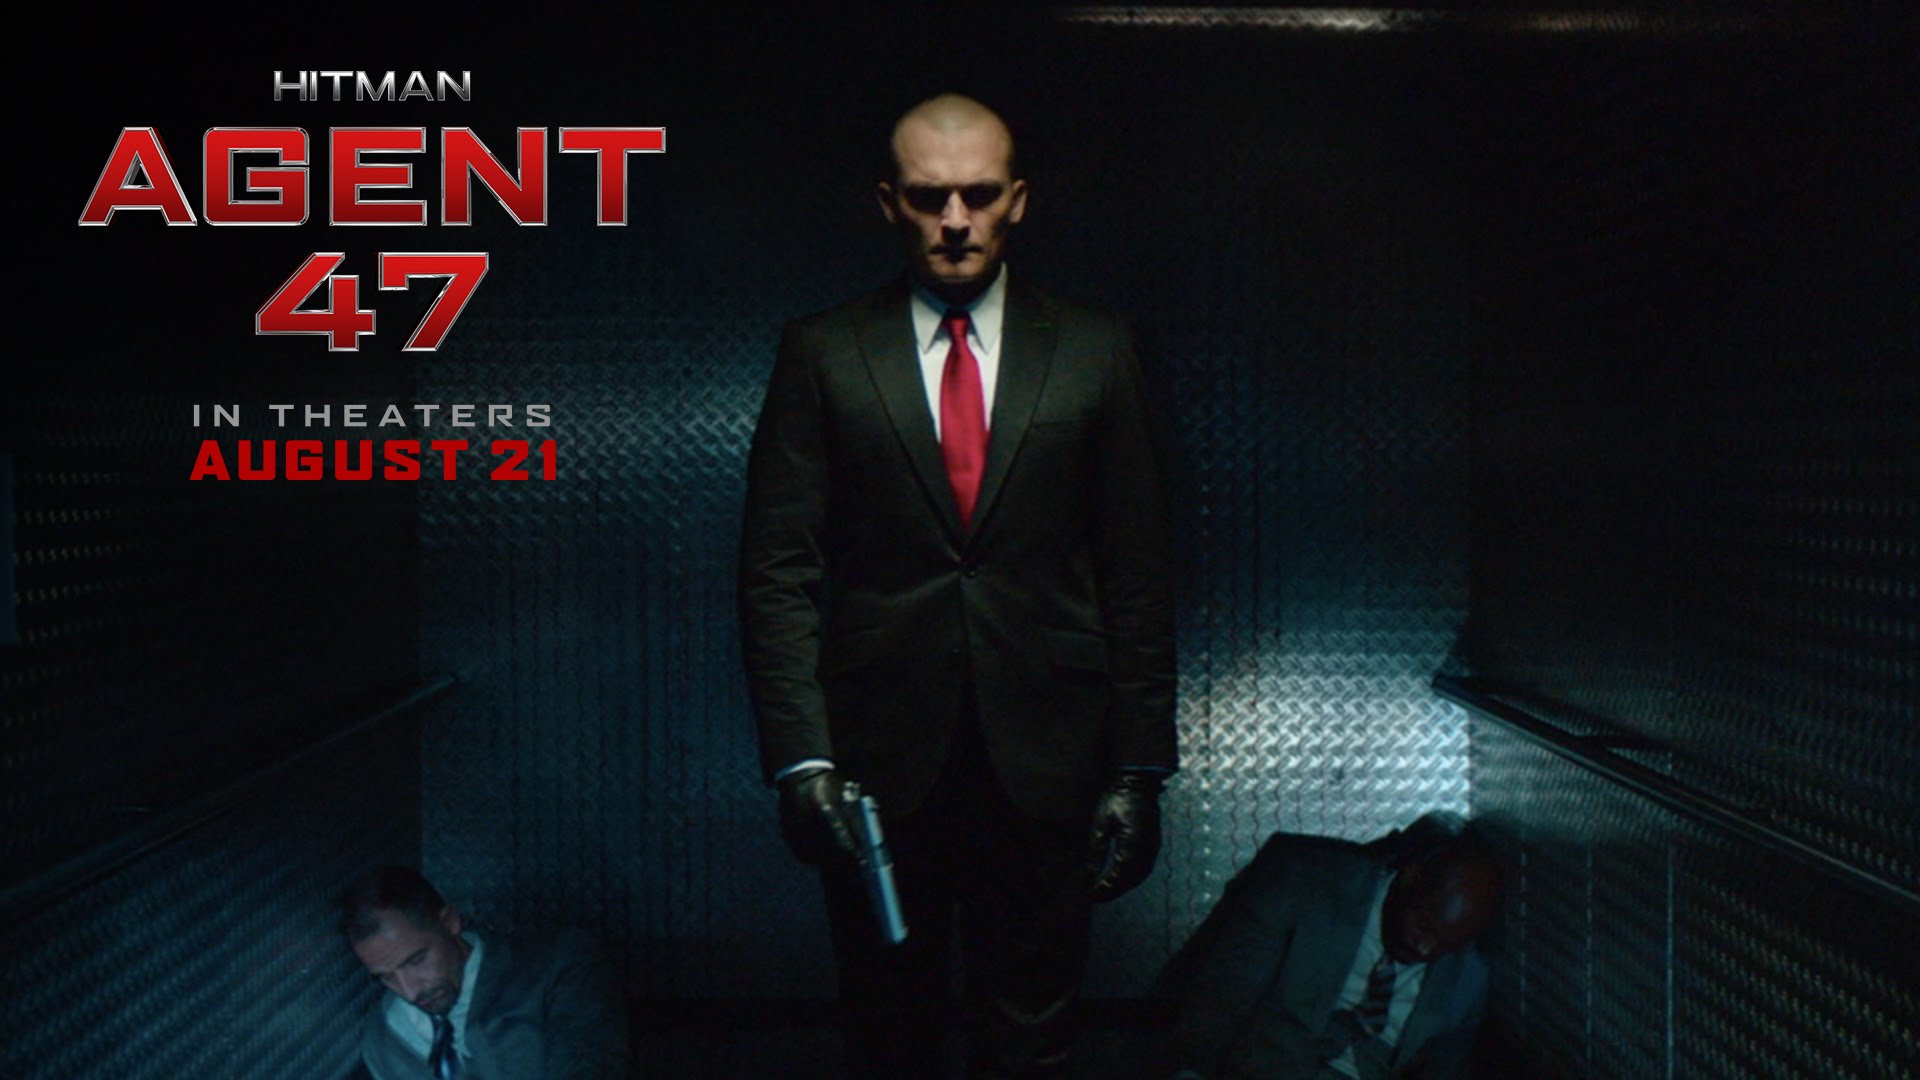 Agent 47 Wallpaper Movie Suit Font Darkness Fictional Character Wallpaperuse